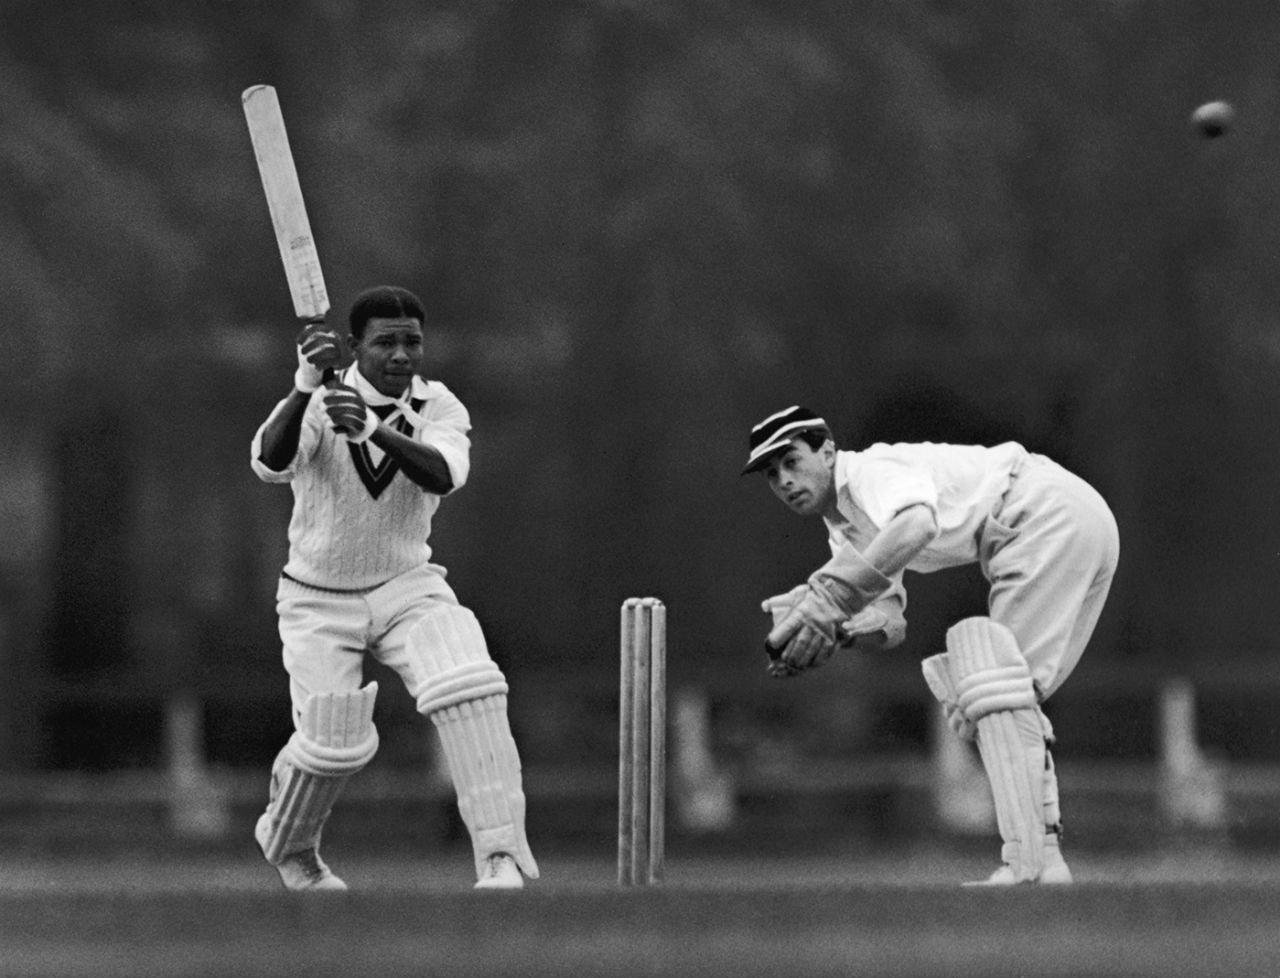 Everton Weekes flicks one to leg, Cambridge University v West Indians, Fenners, The wicket keeper is W H Denman, May 18, 1950